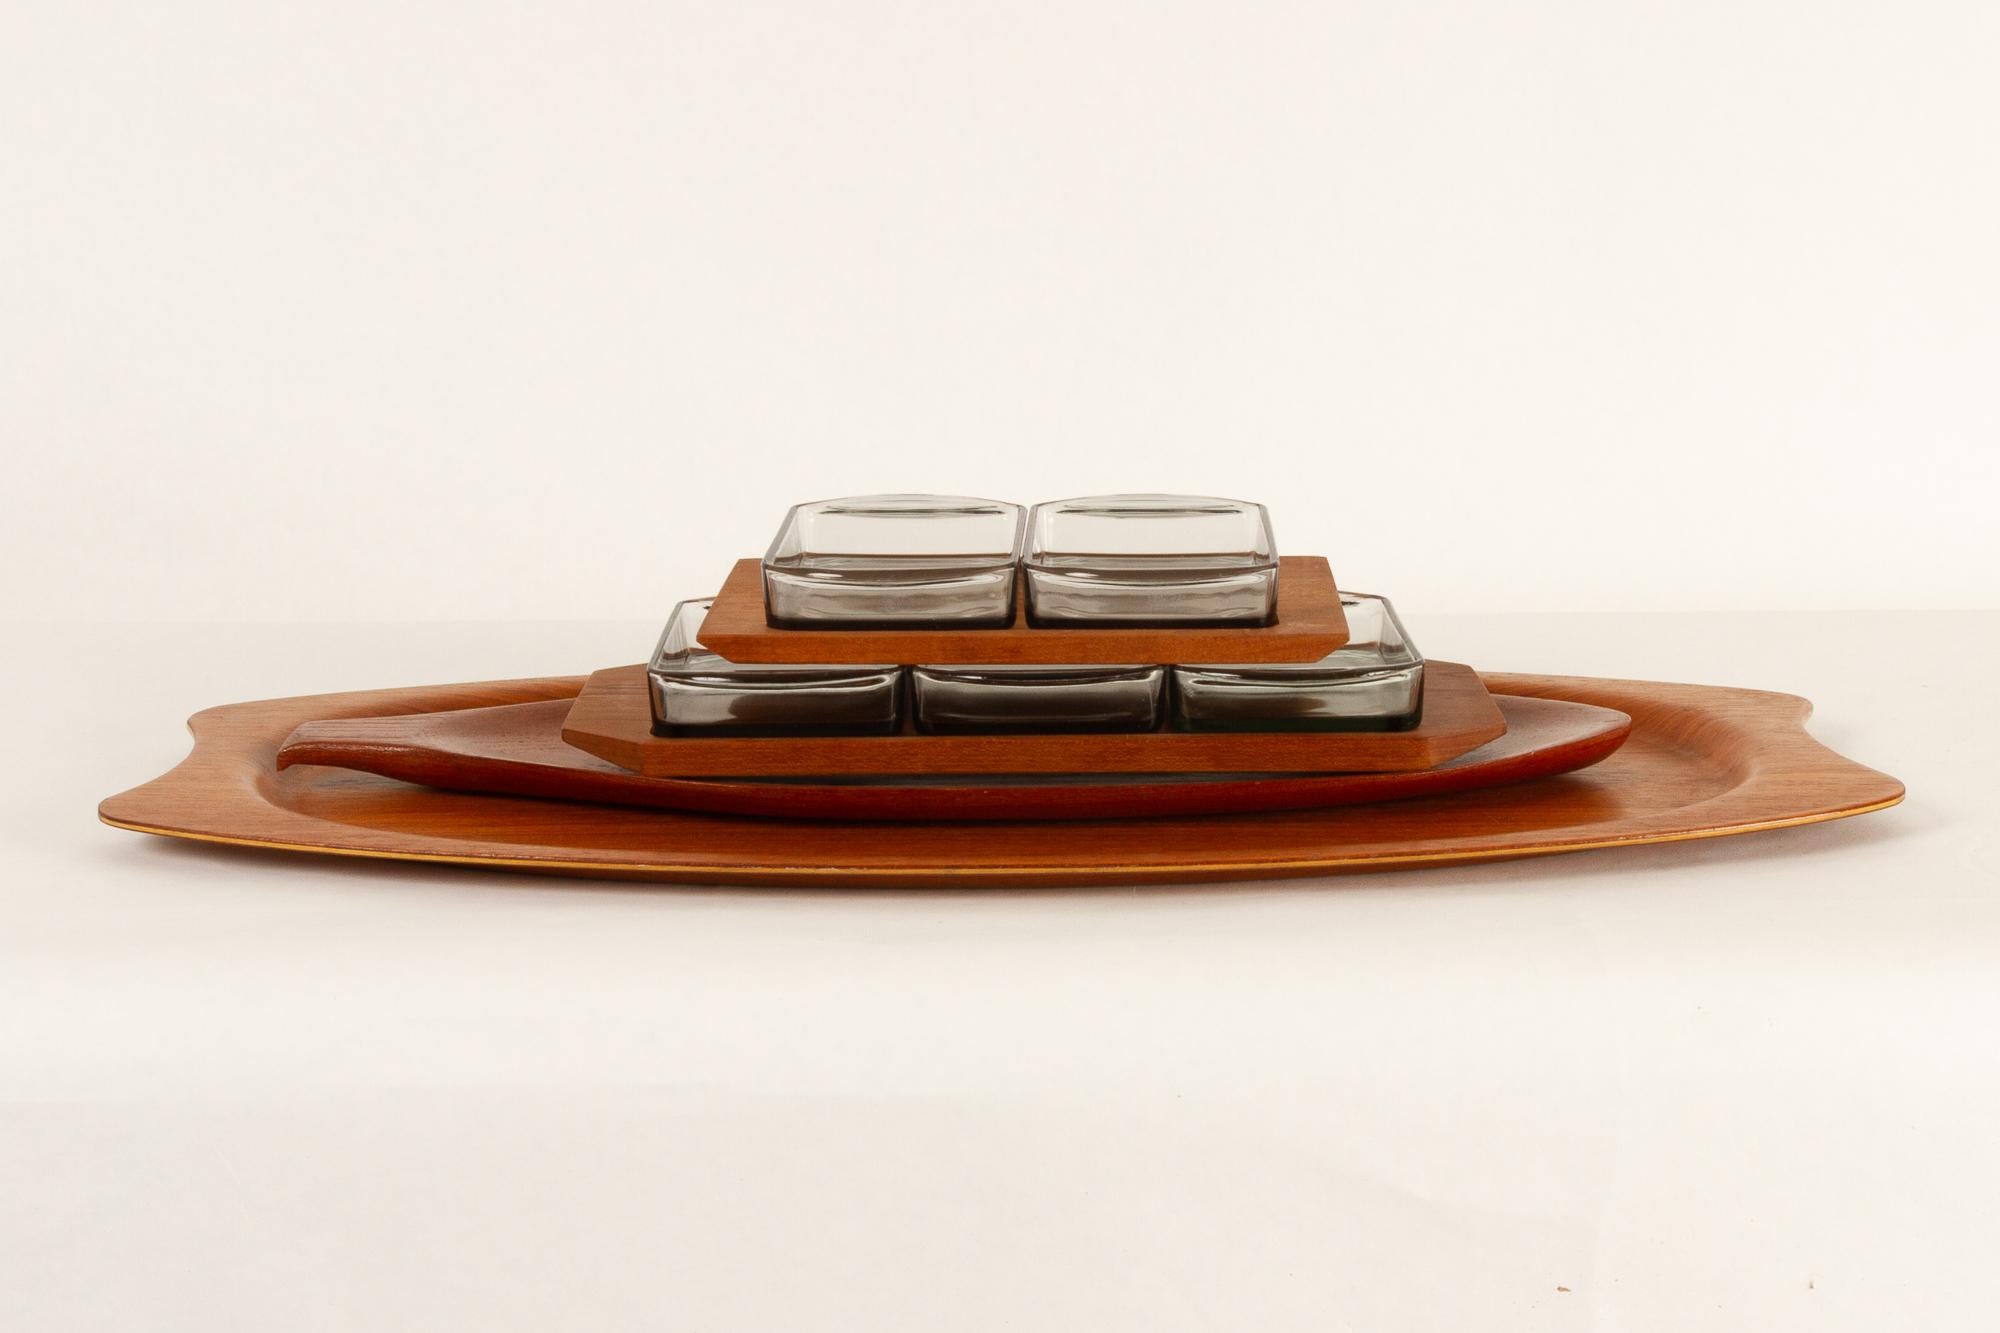 Danish vintage teak serving trays 1960s set of 4.
Danish Mid-Century Modern teak trays.
This set consists of:
A large oval tray by Silva, length 65.5.
A leaf shaped tray in solid teak.
Two serving trays with glass bowls by Wiggers.
Good